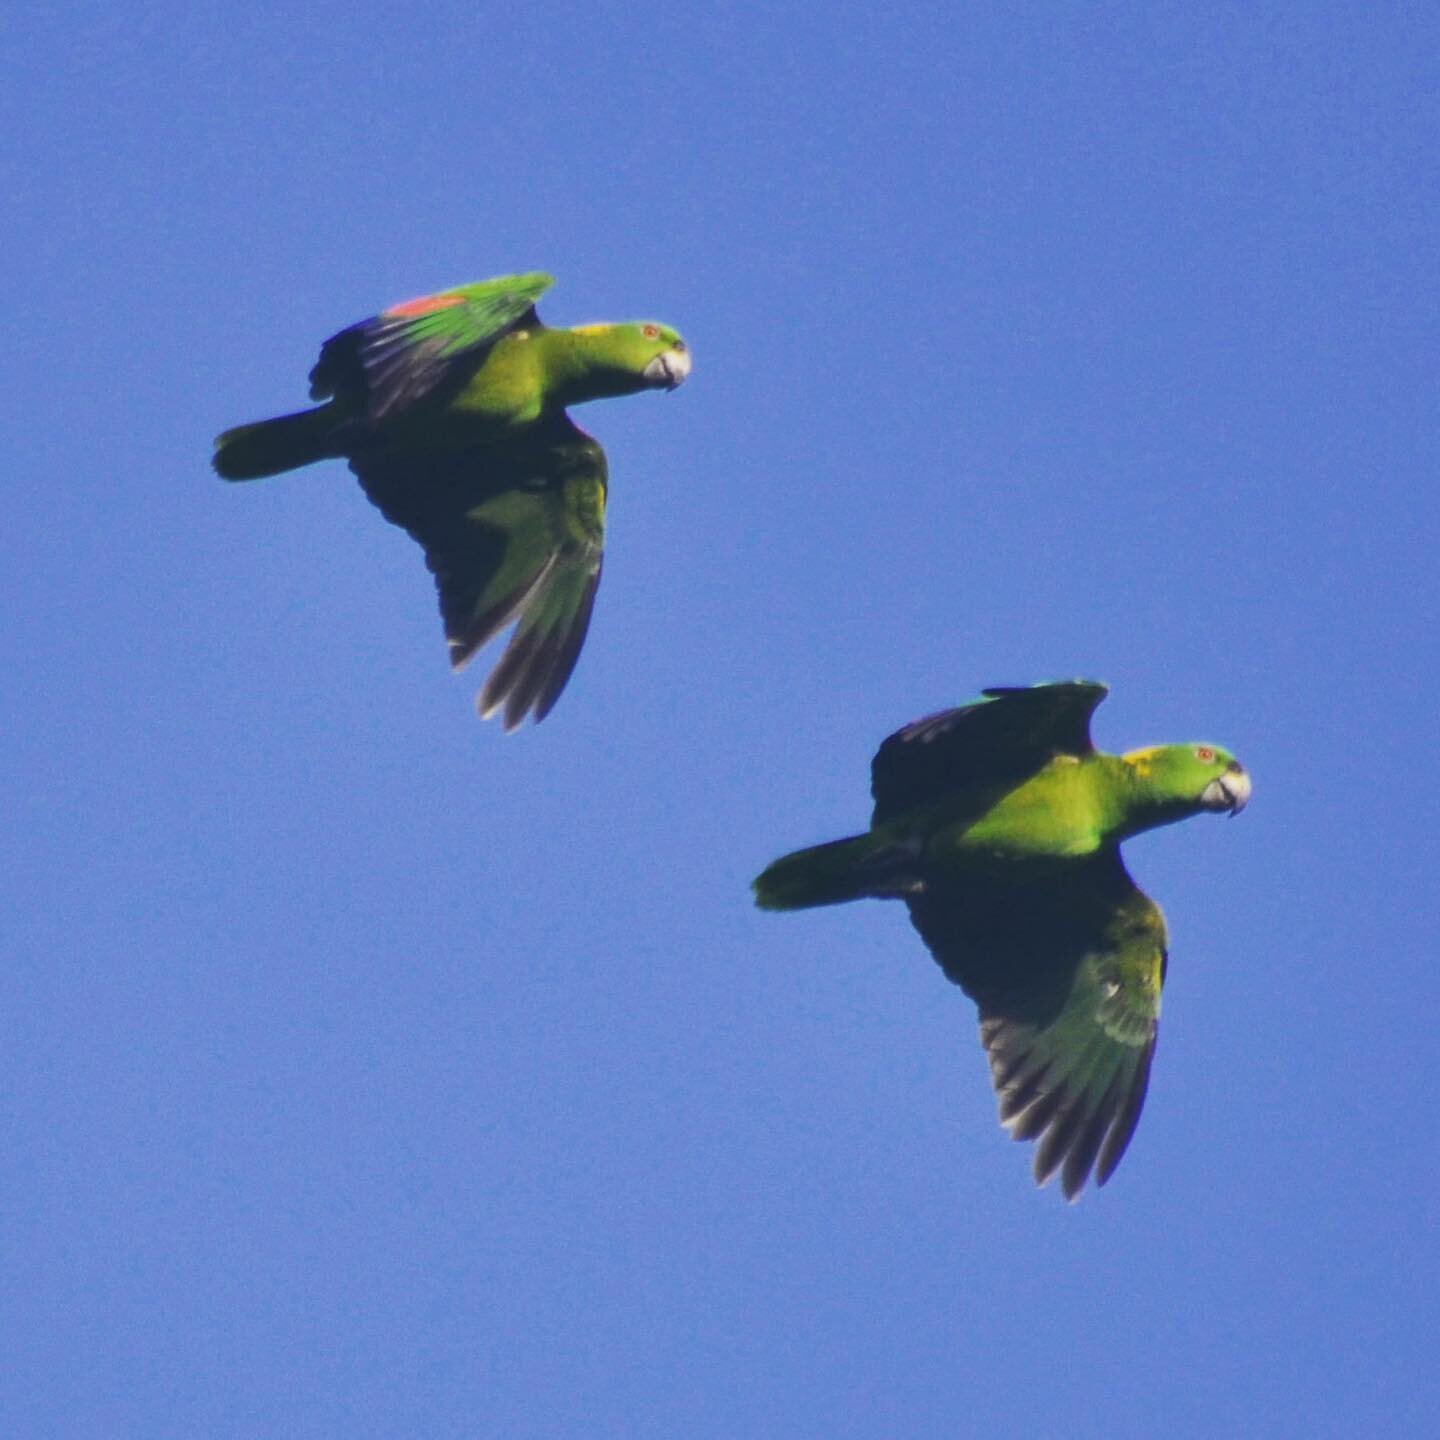 Day 2: The other half of the group will participate in an early evening count of yellow-naped parrots as they return to their roost for the night. (photo: Equipo Tora Carey)